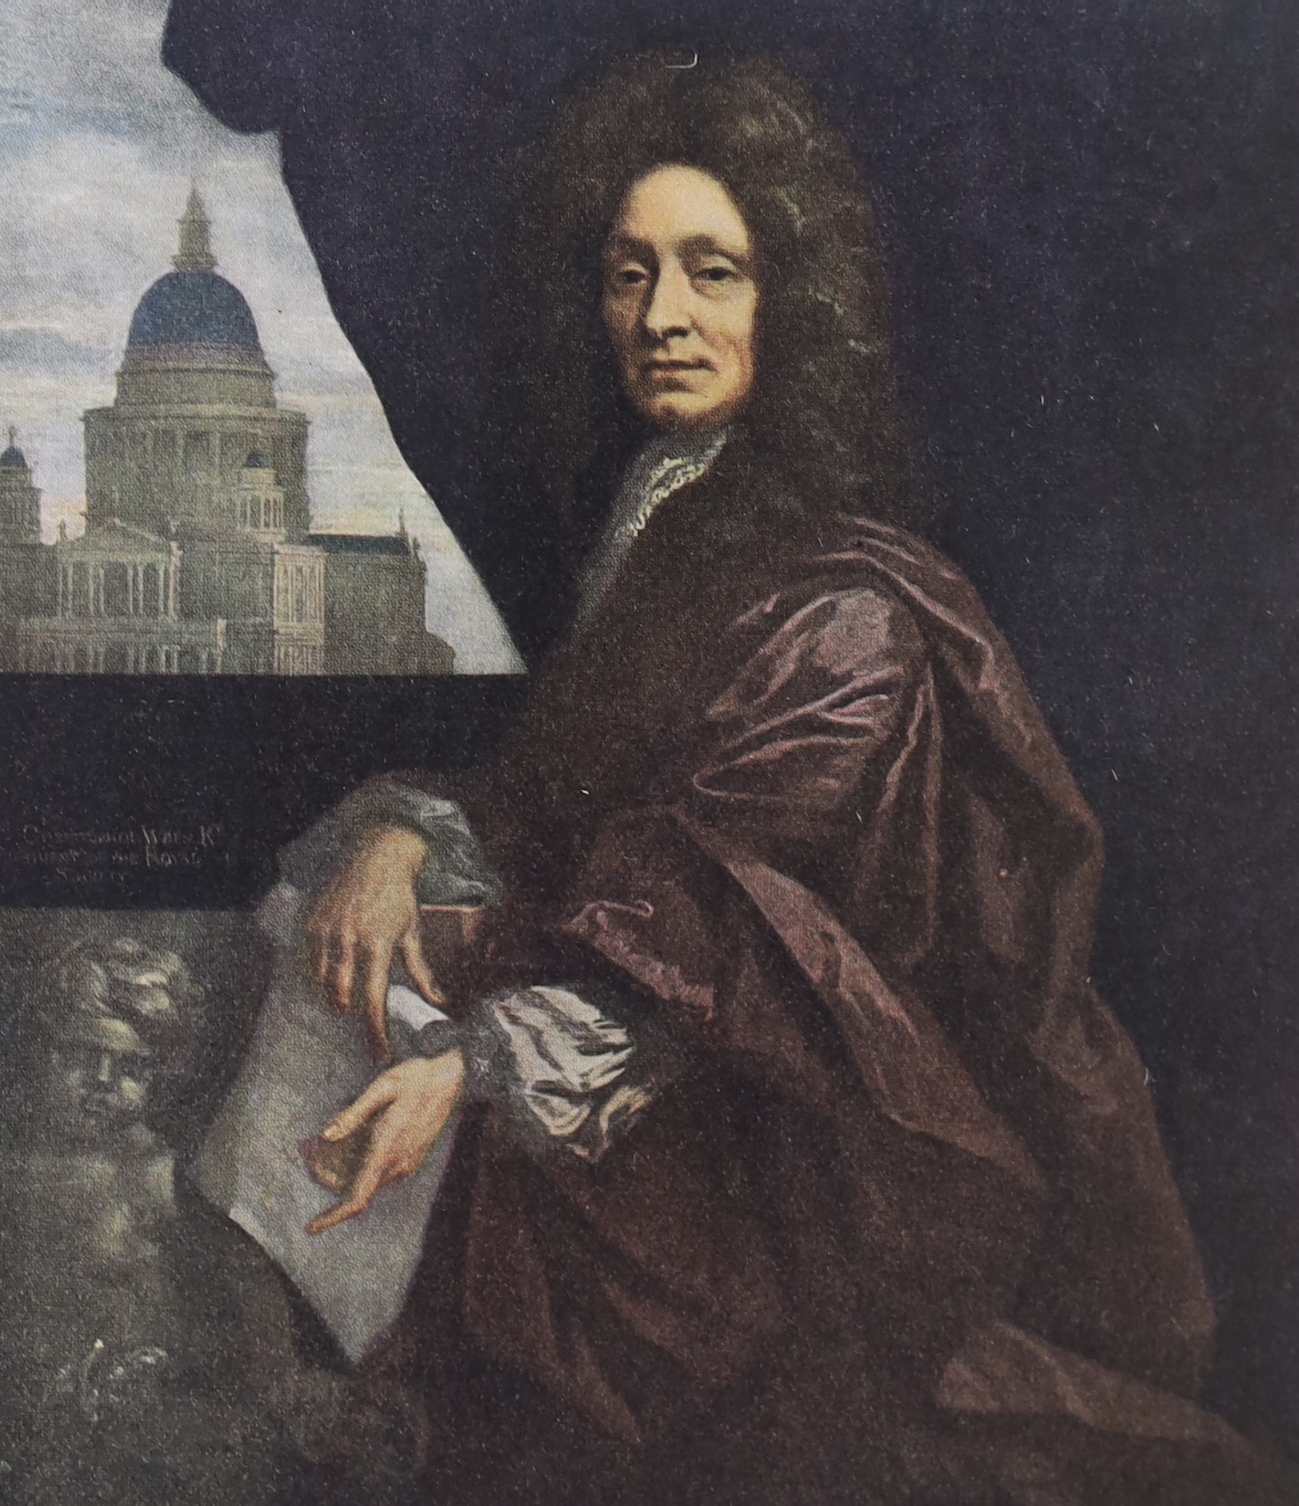 Wren, Christopher - Sir Christopher Wren A.D 1632-1723. Bicentenary Memorial Volume, Published under the Auspices of The Royal Institute of British Architects, one of 250, 4to, vellum, Hodder & Stoughton, London, 1923